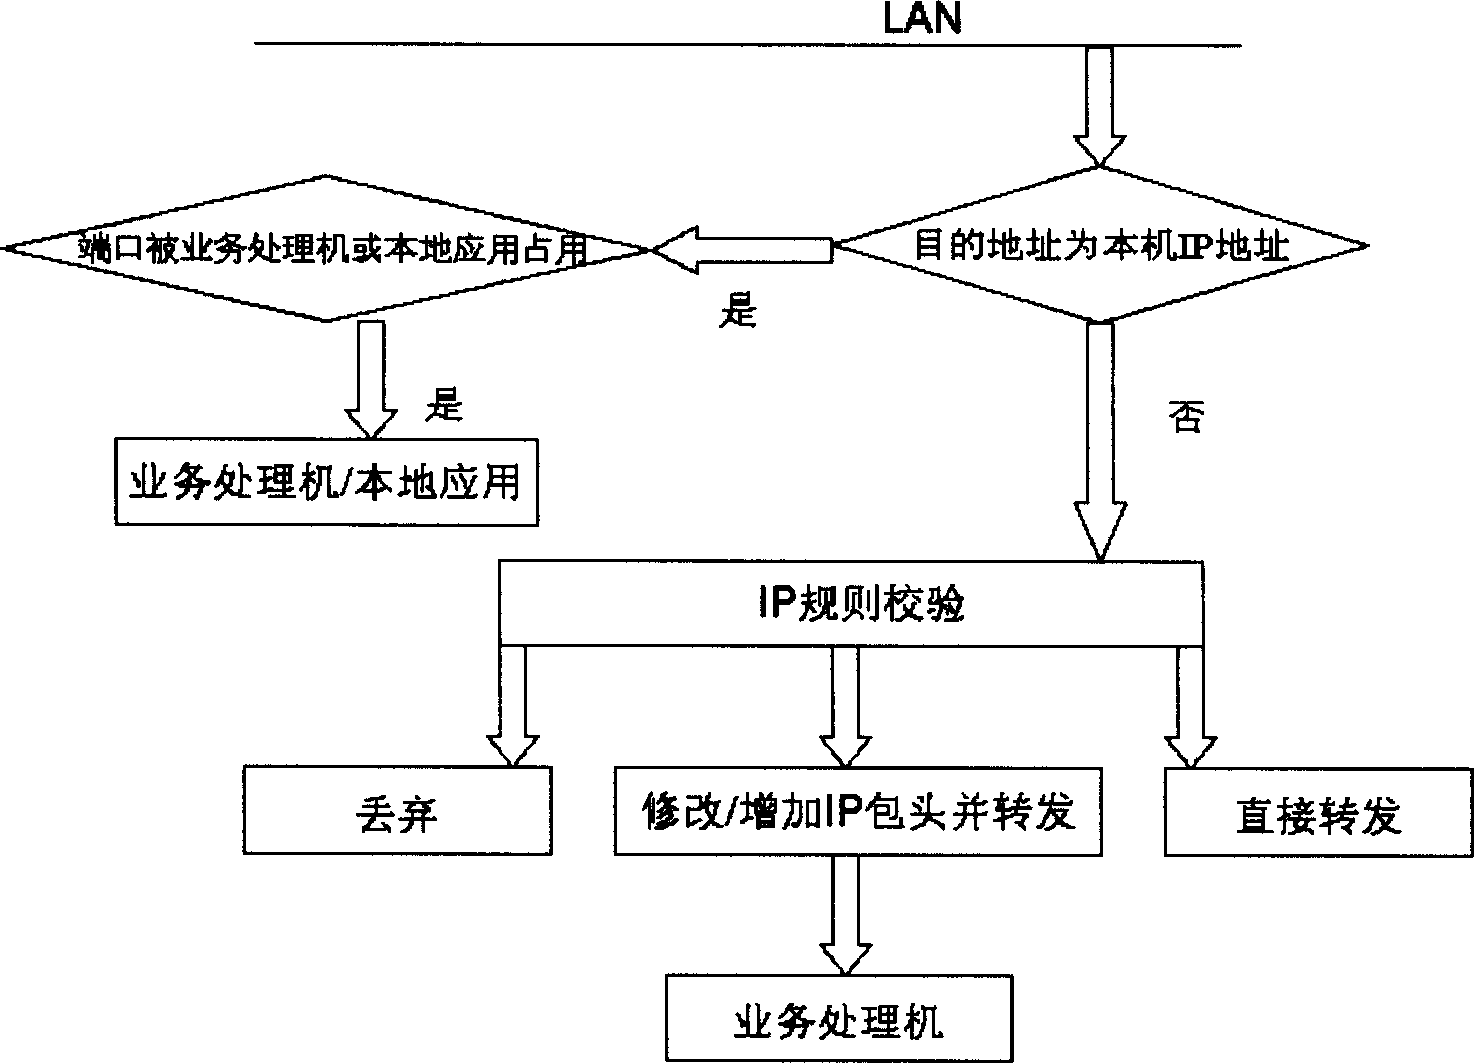 Method of carrying out radio data service integrated network gate